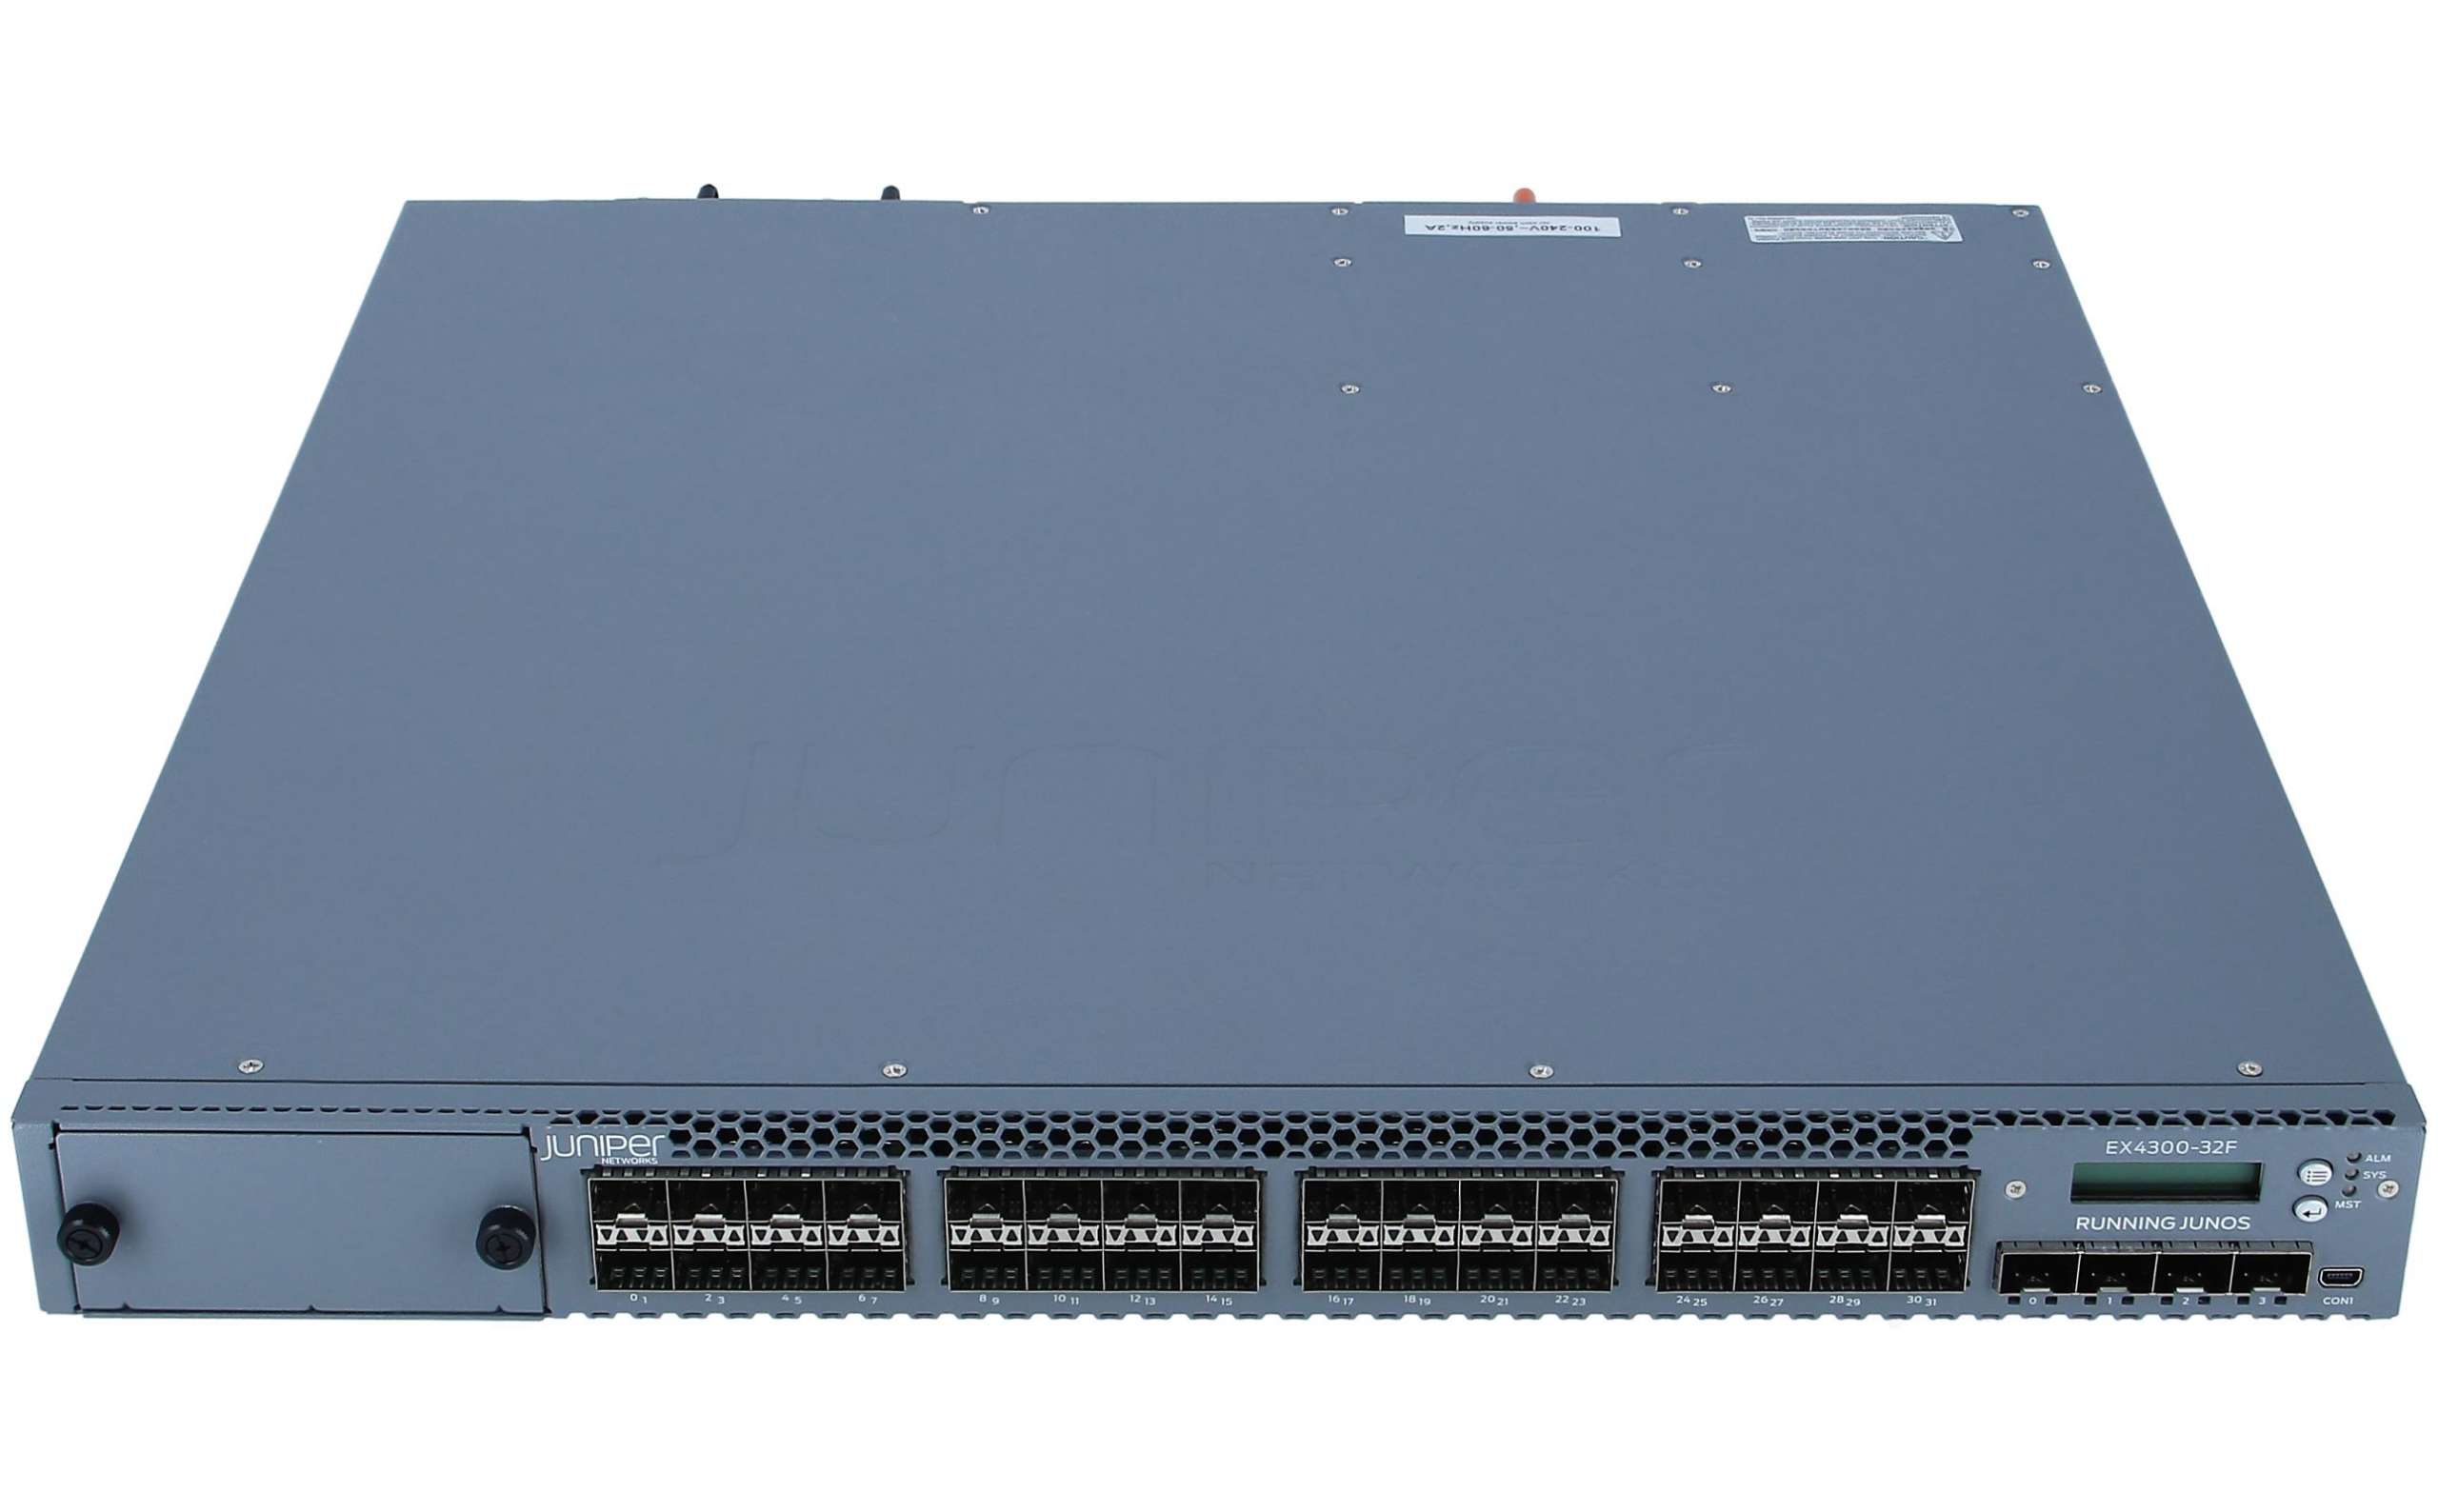 EX4300-32F-DC Juniper Layer 3 Switch Manageable 3 Layer Supported 1U High  Desktop Rack-mountable (Refurbished)